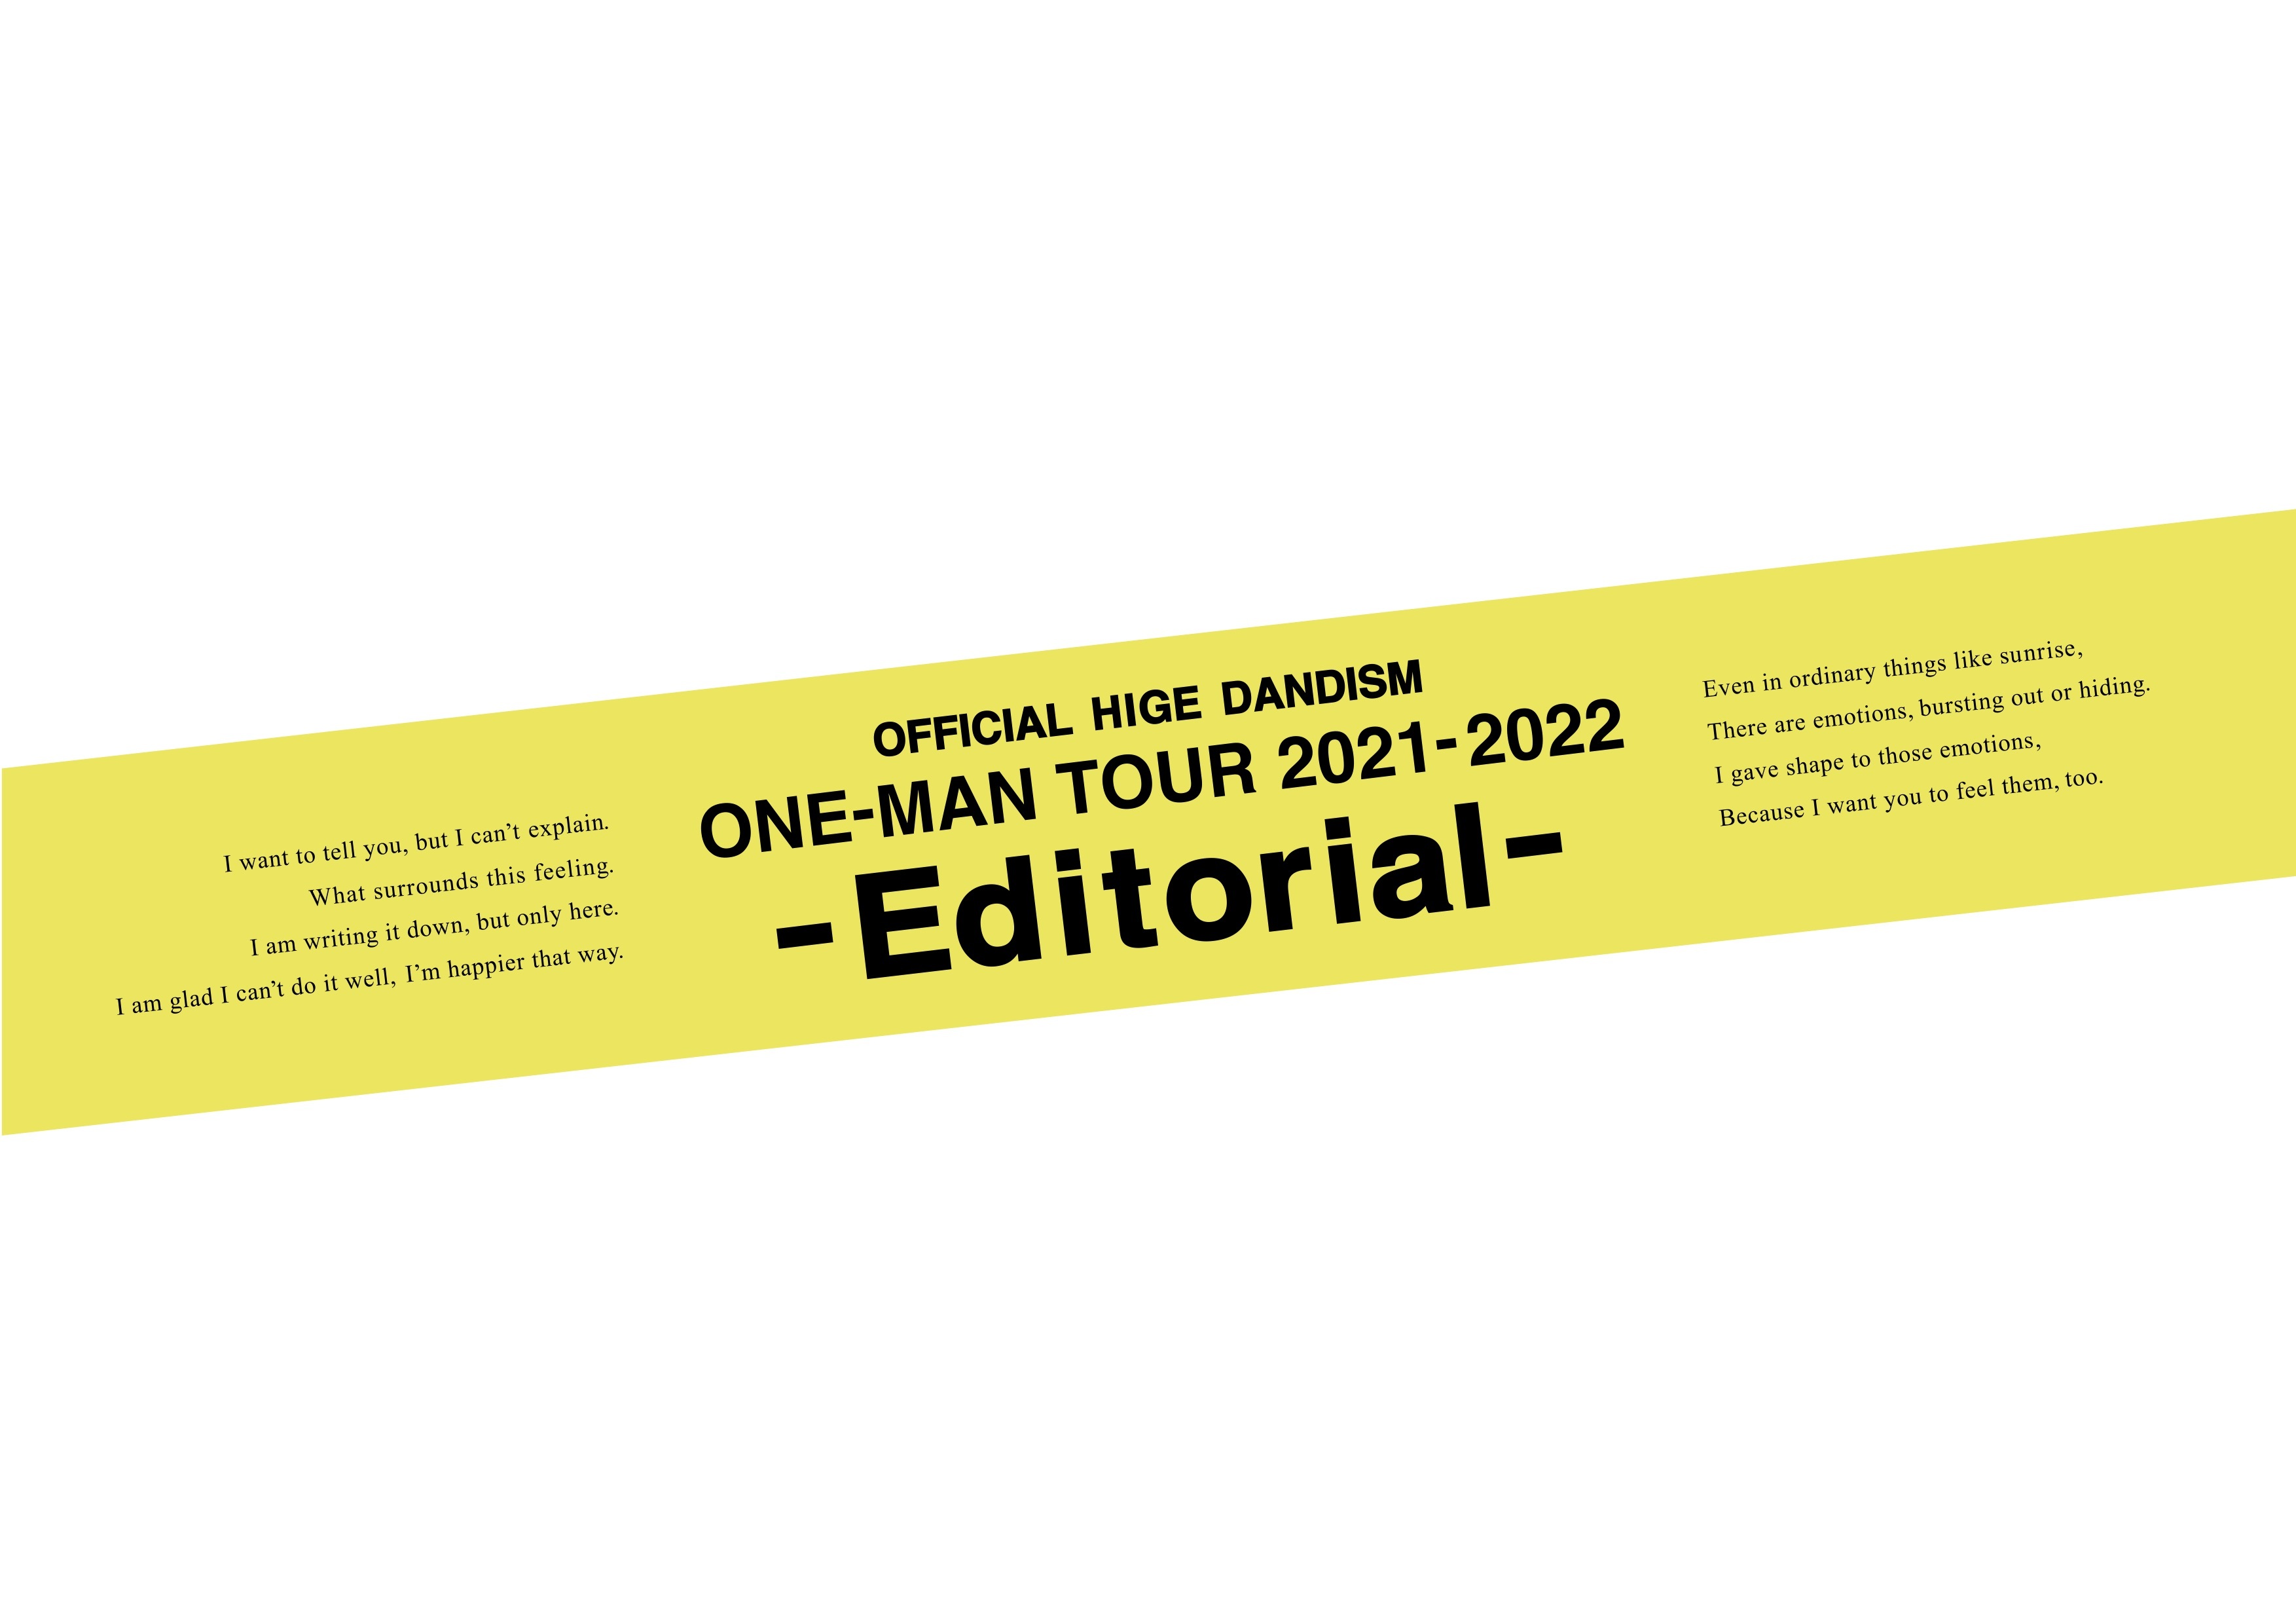 『Official髭男dism one - man tour 2021-2022 - Editorial -』ツアーロゴ